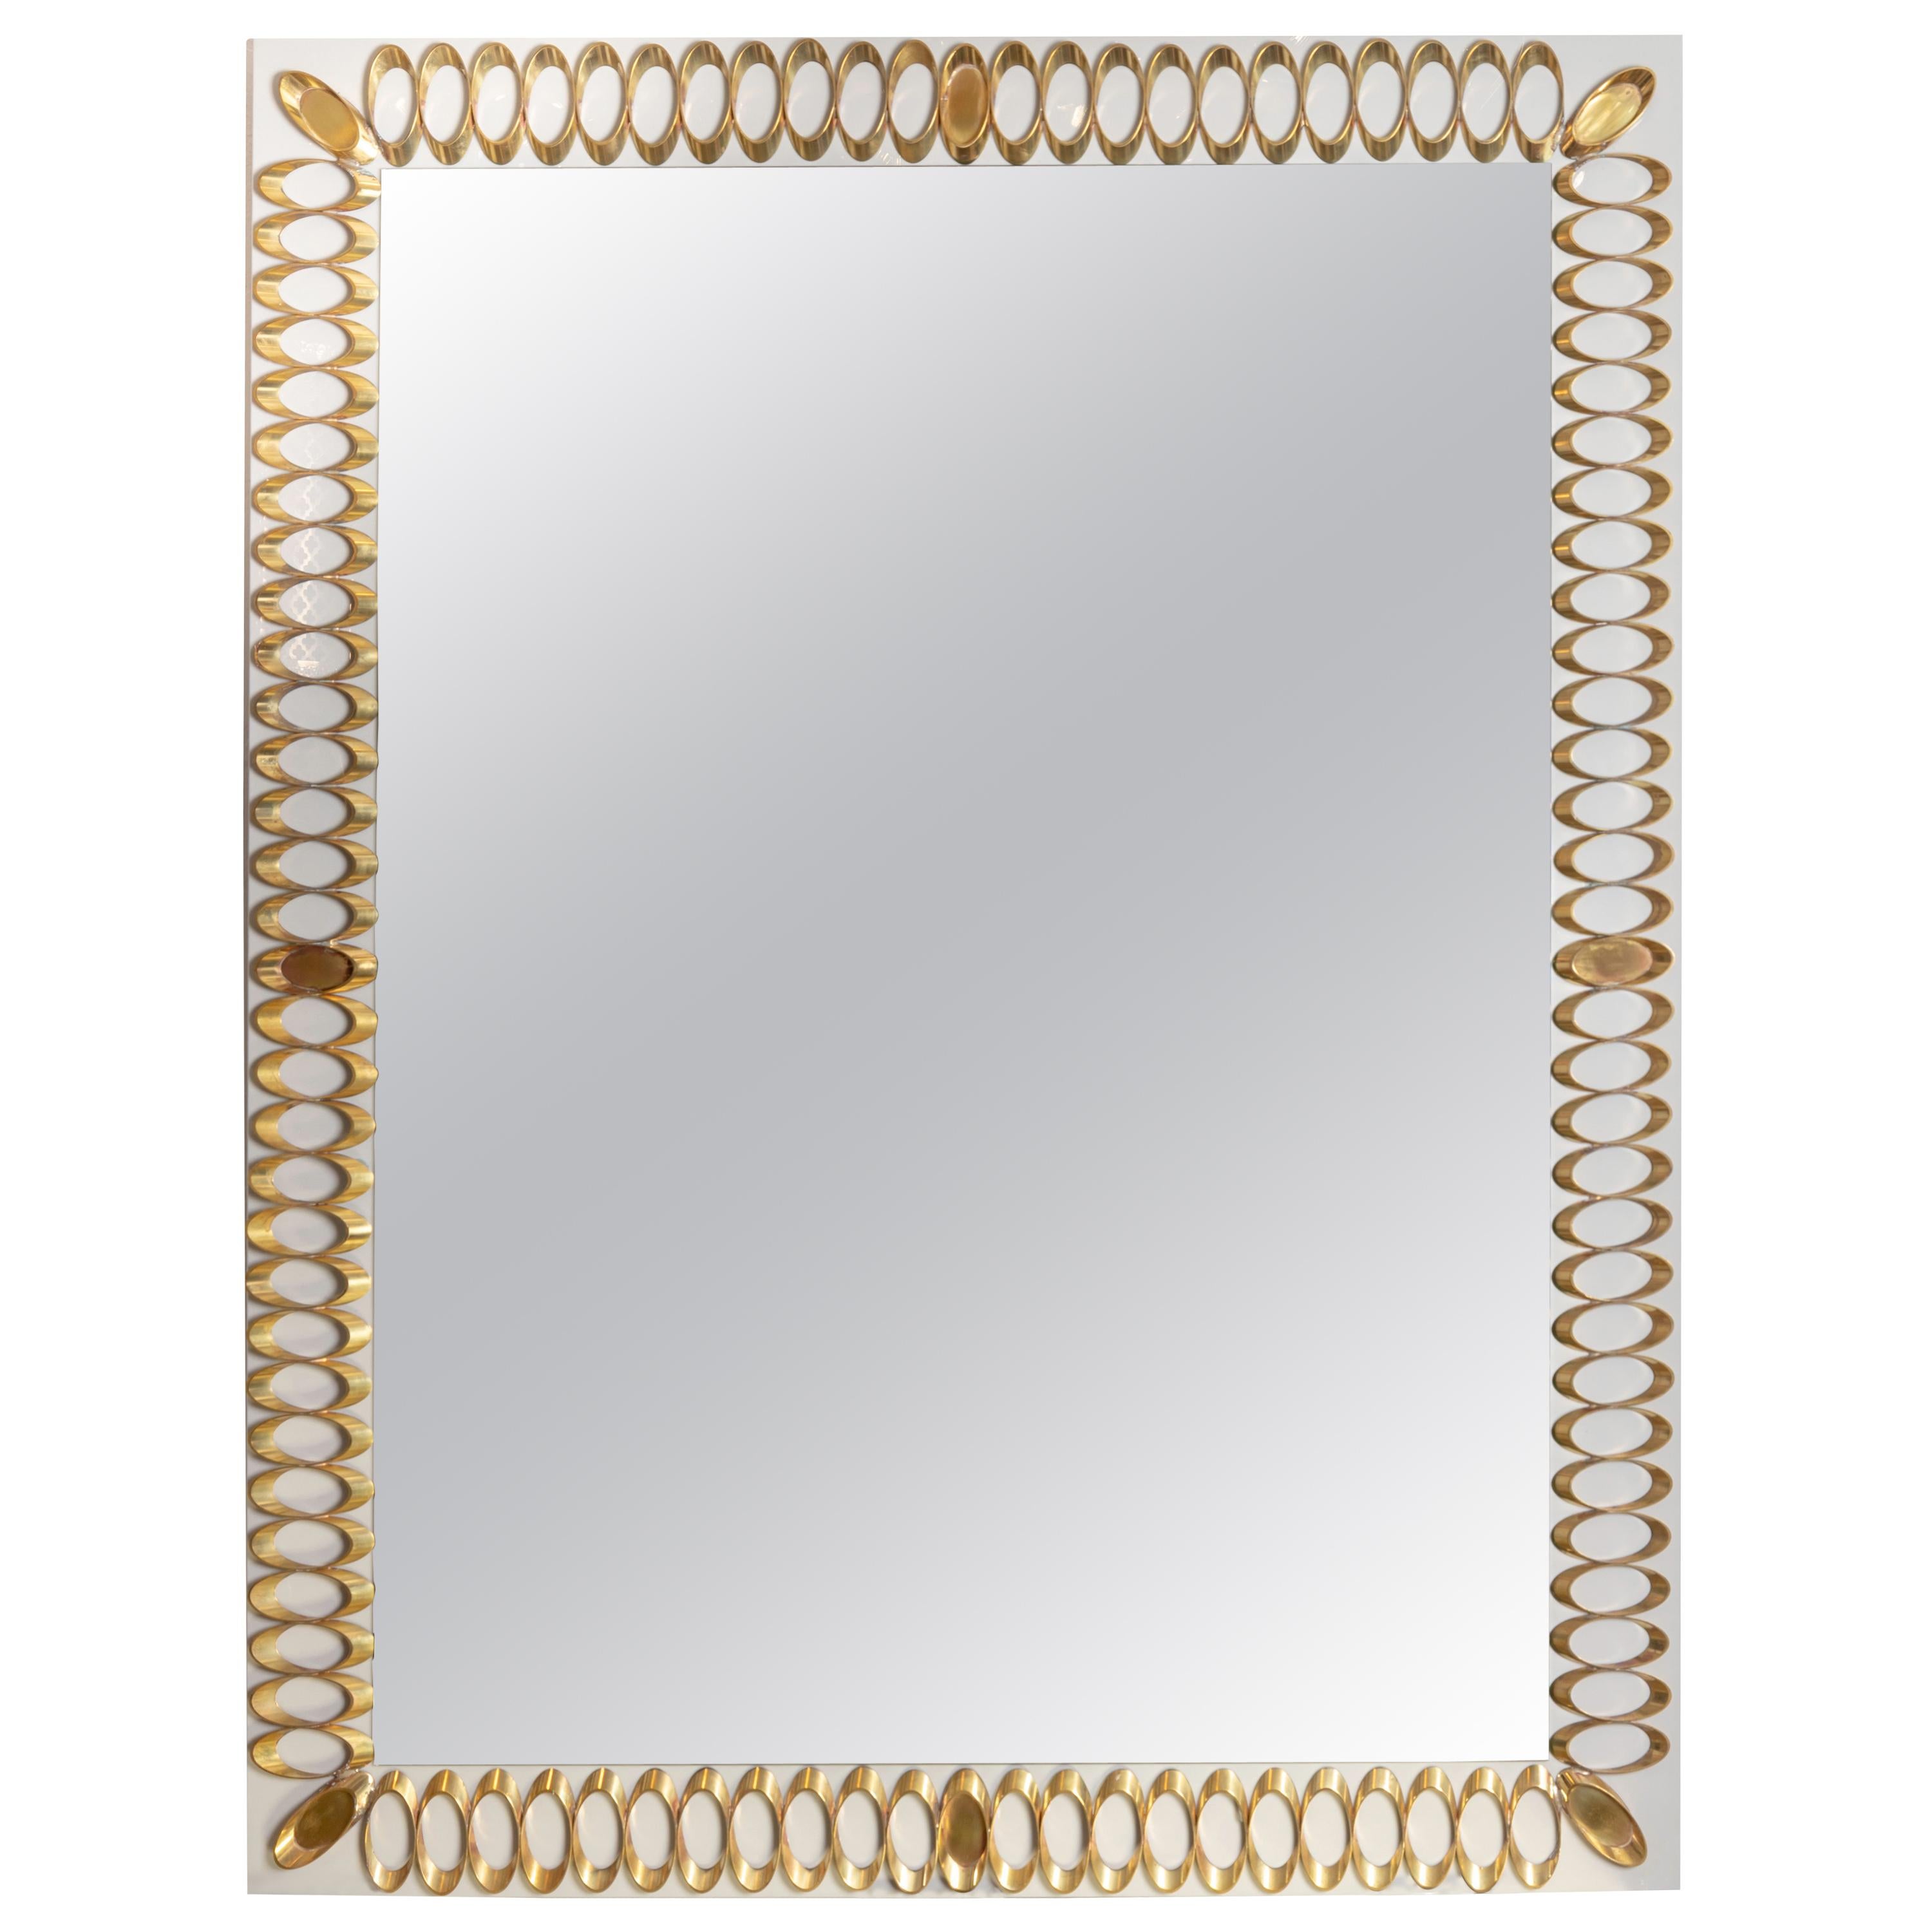 Rectangular Pearl and Grey Glass Mirror with Brass Oval Decorative Design